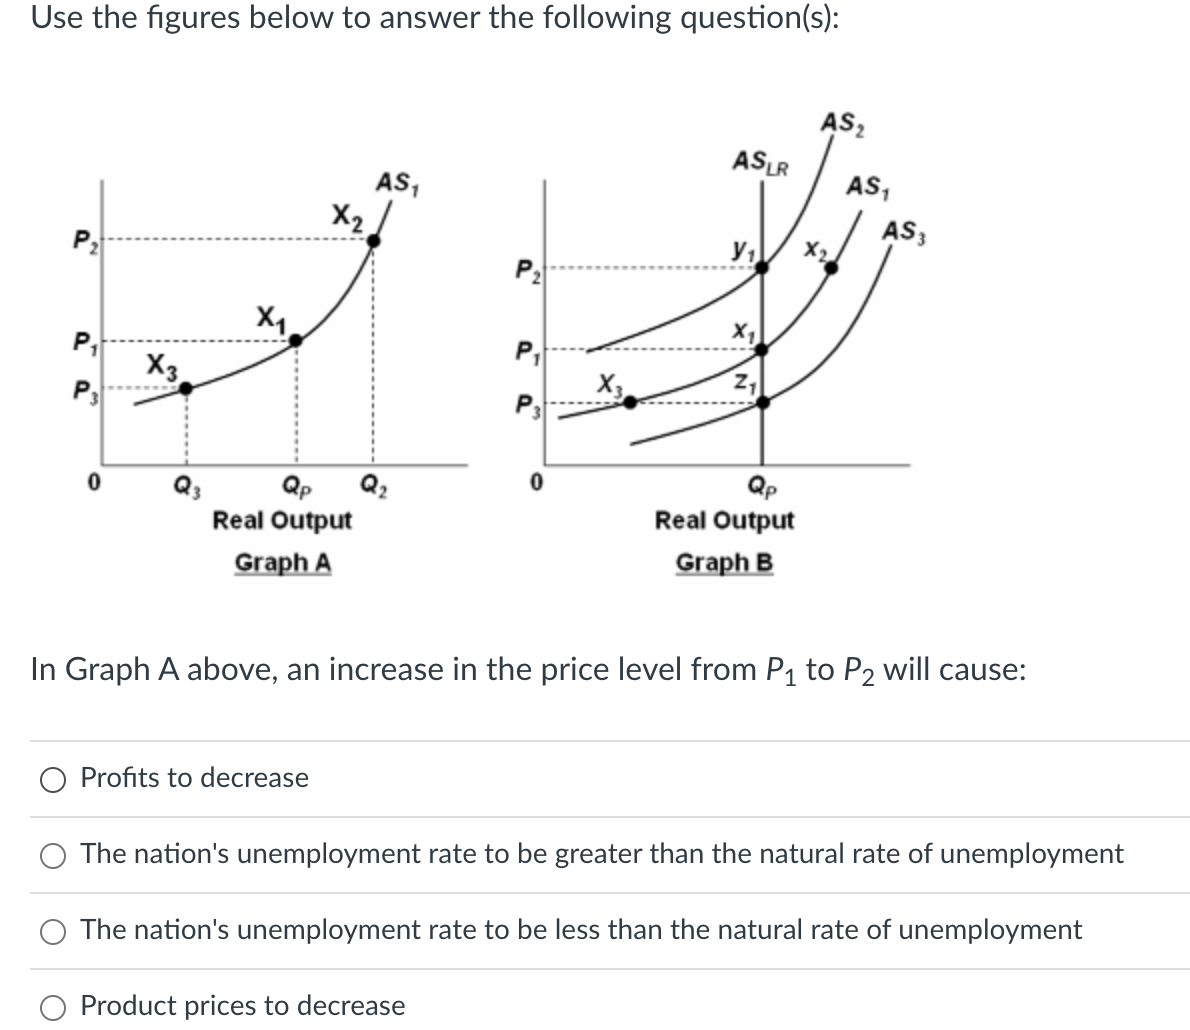 Use the figures below to answer the following question(s):
P₁
P3
0
X3
X₁
X₂
Qp
Real Output
Graph A
Profits to decrease
AS₁
X₂
ASLR
Product prices to decrease
ут
X
Qp
Real Output
Graph B
AS₂
AS₁
In Graph A above, an increase in the price level from P₁ to P₂ will cause:
AS 3
The nation's unemployment rate to be greater than the natural rate of unemployment
The nation's unemployment rate to be less than the natural rate of unemployment